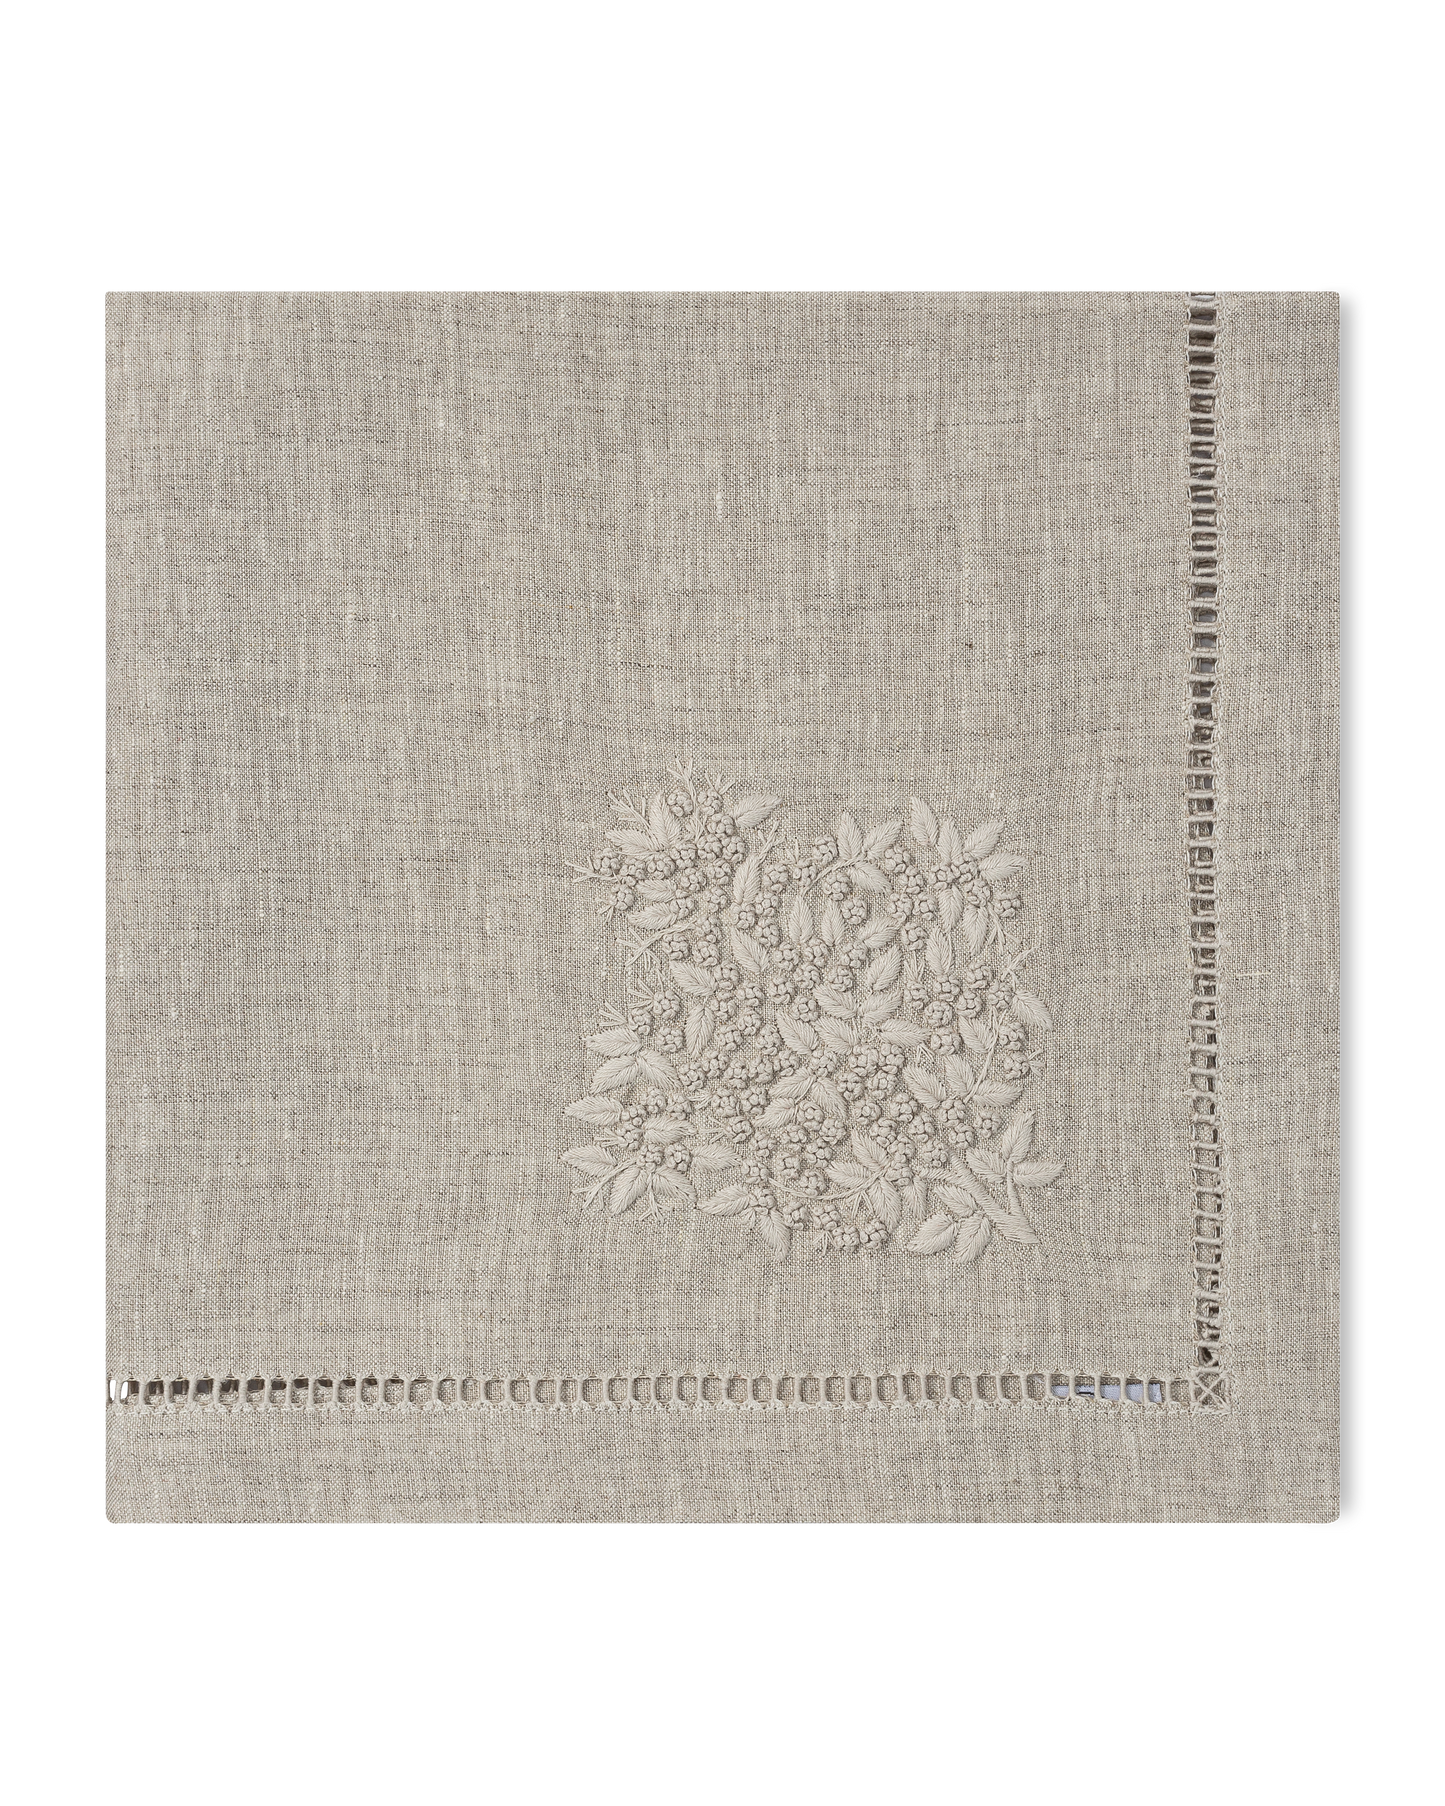 A natural linen napkin with a hemstitch border and natural french knot floral embroidery